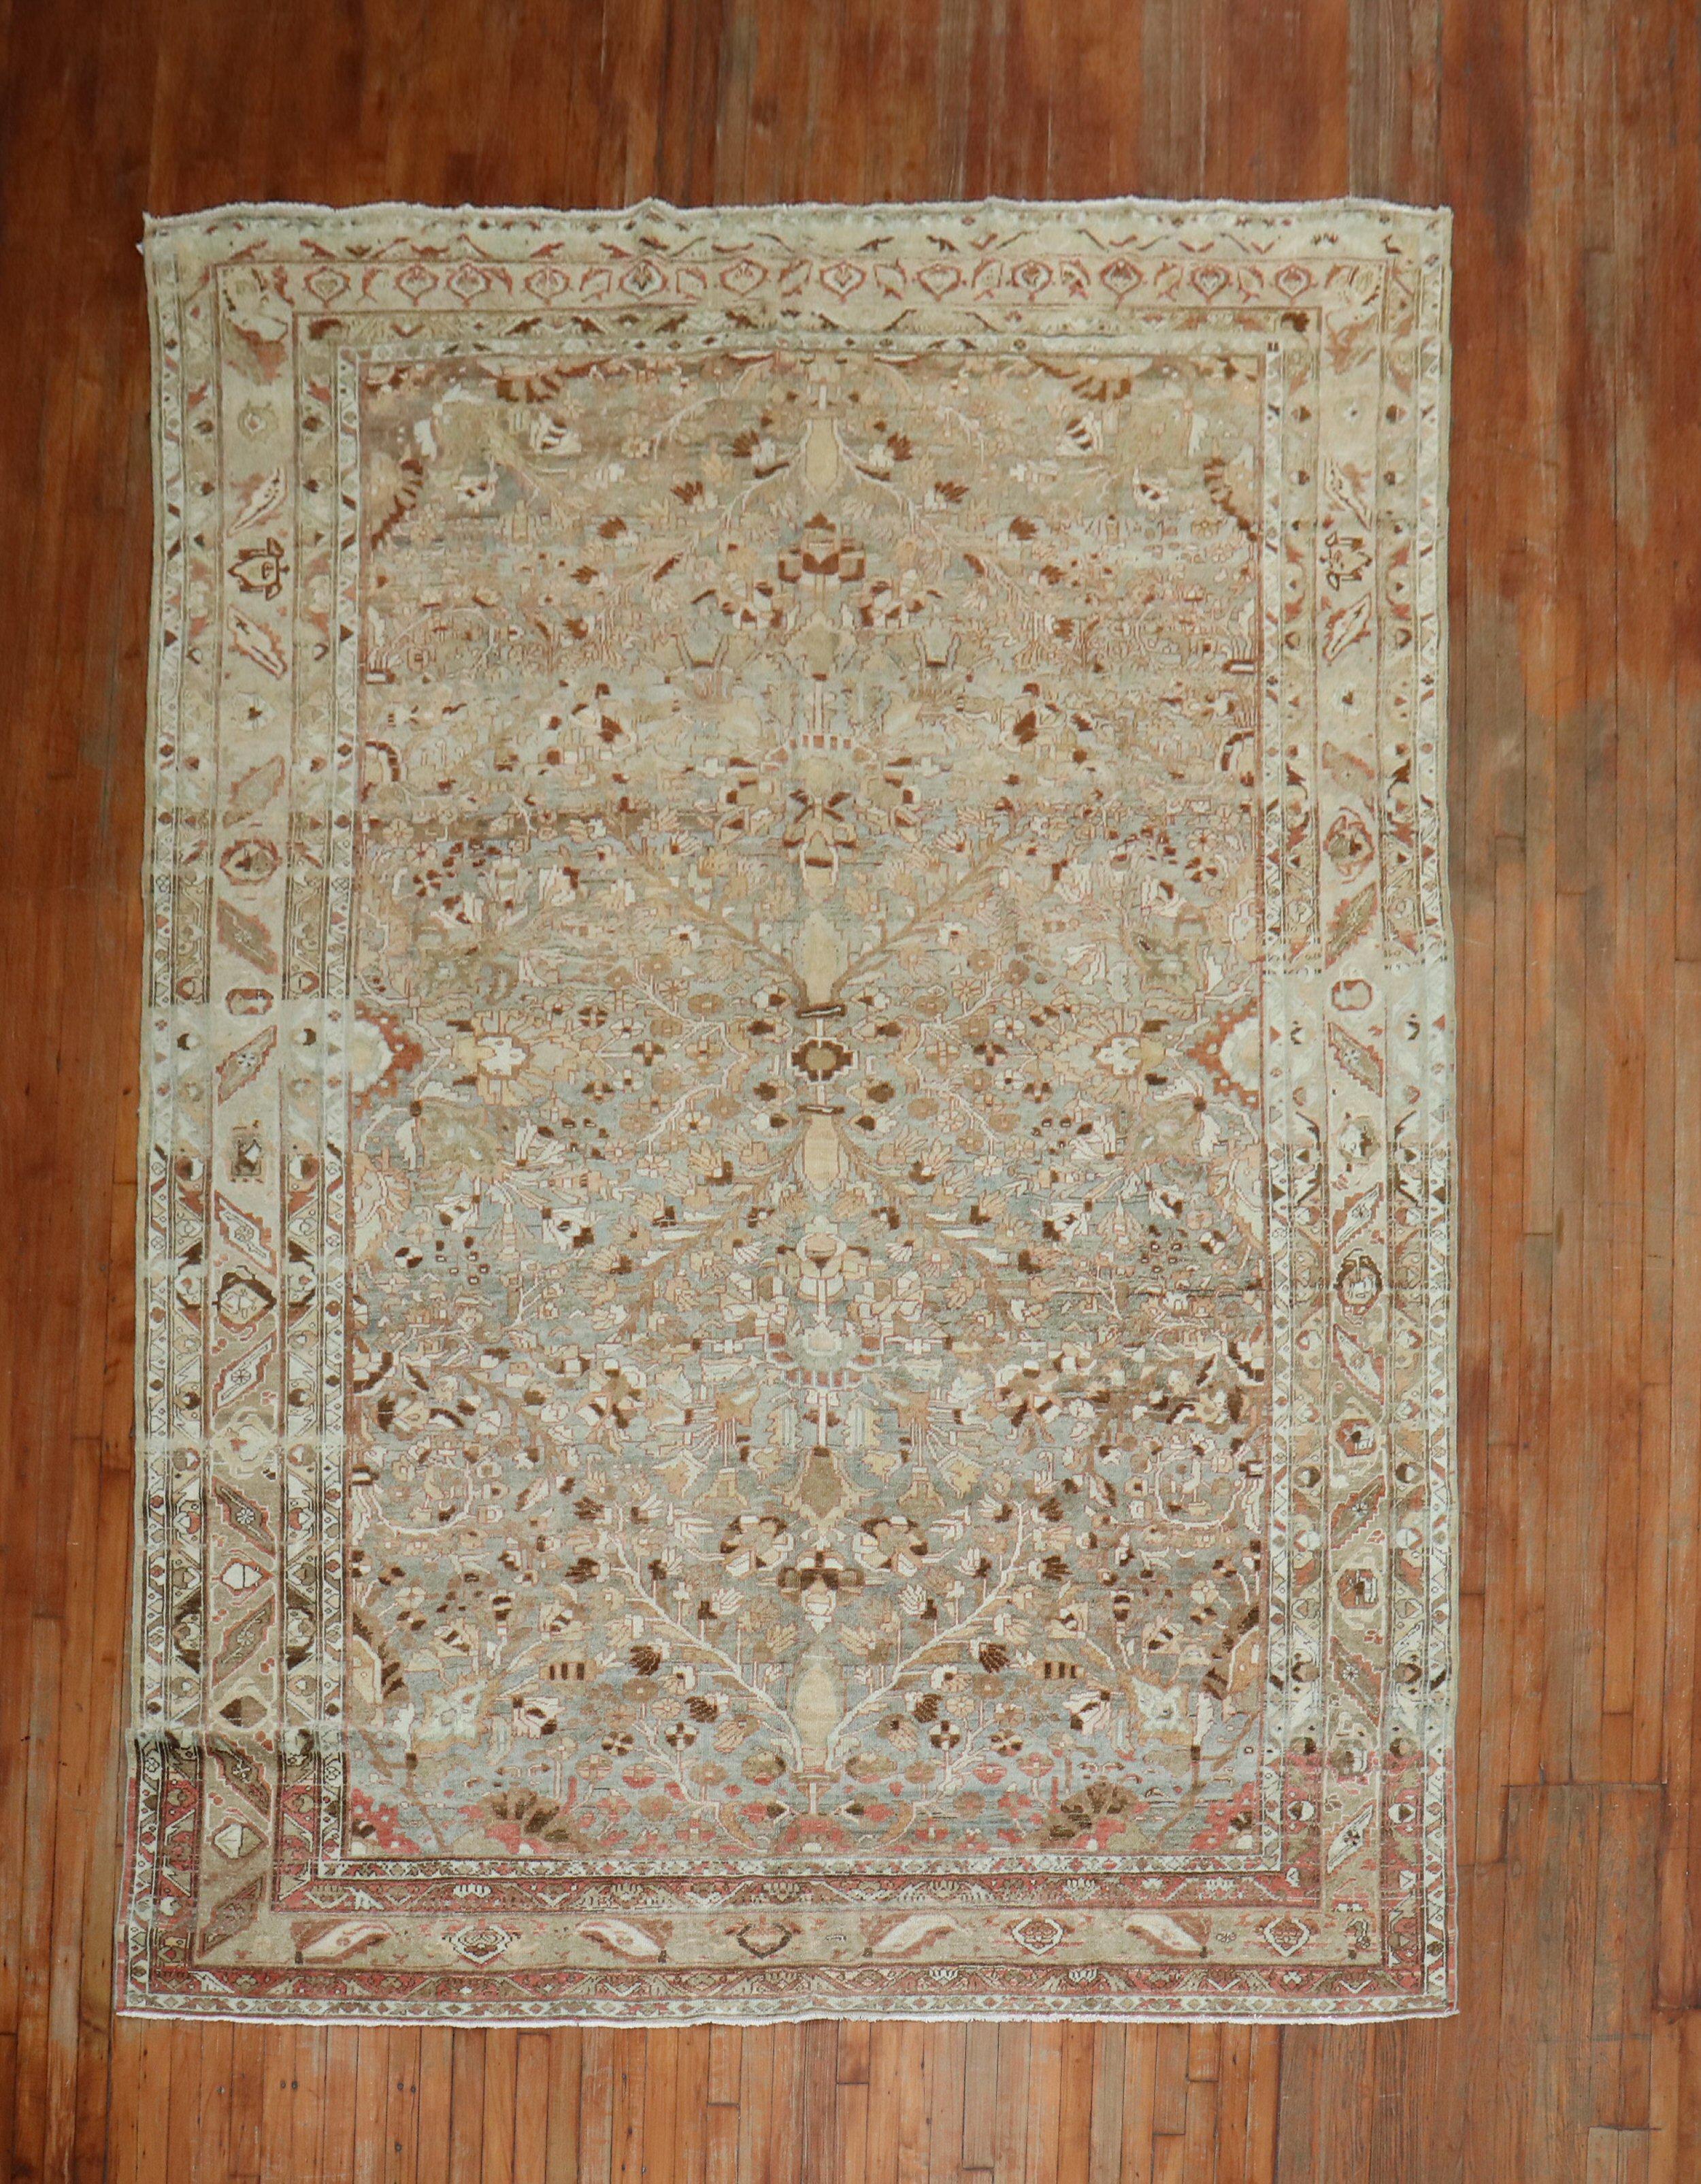 An antique Persian Malayer rug with an all-over design on a gray abrashed ground, accents in rust, caramel, ivory and brown

Measures: 8' x 11'6''.